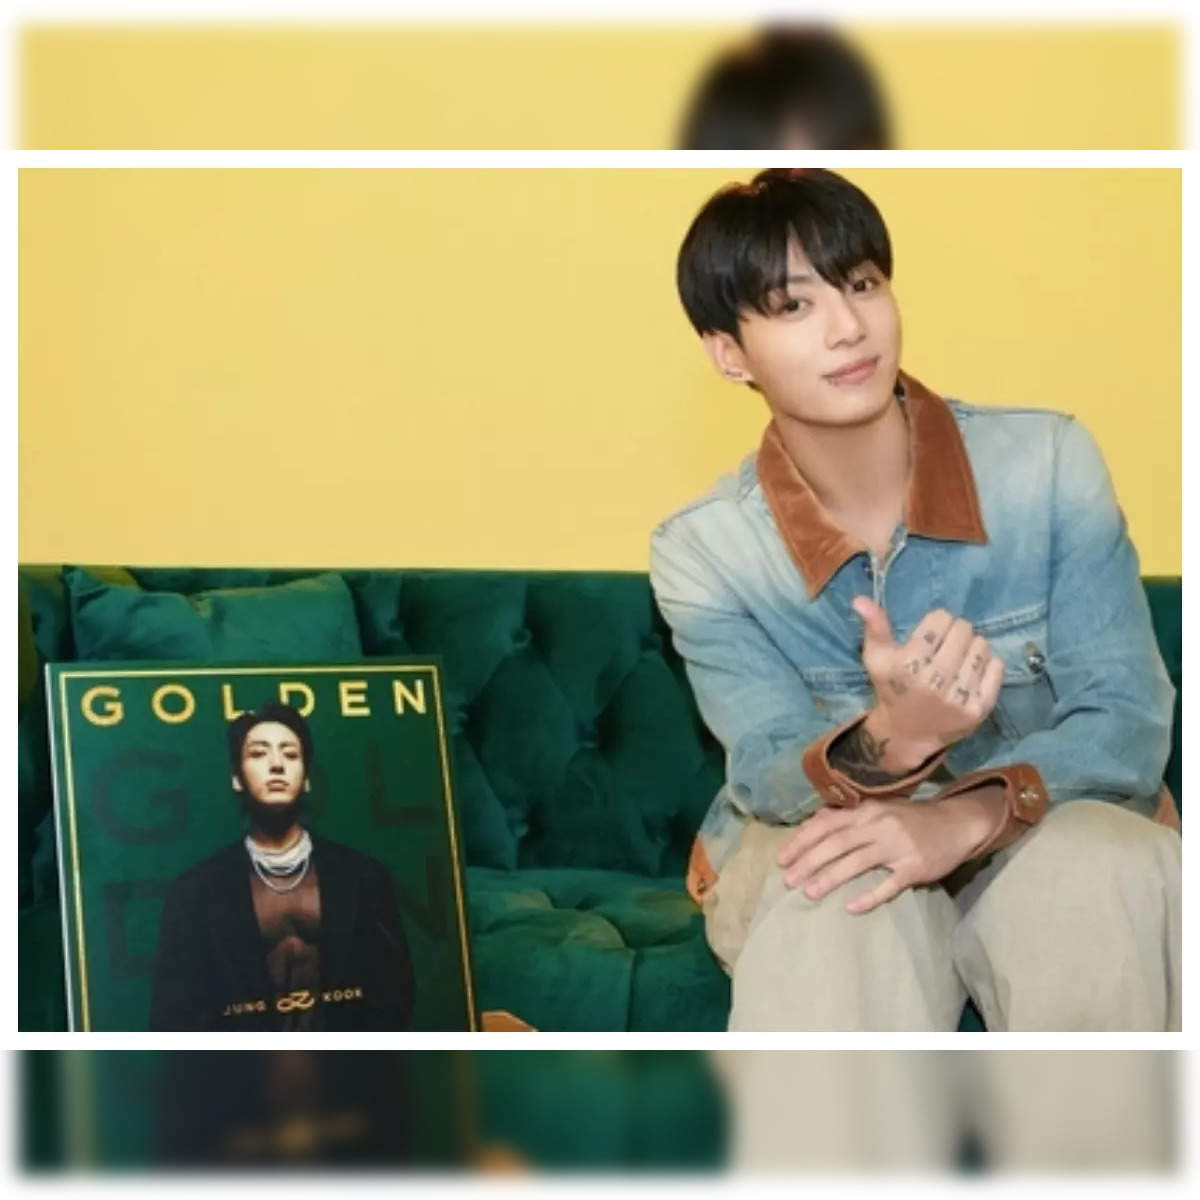 BTS' Jungkook offers a glimpse of solo album 'GOLDEN' with unique posters  revealing the lyrics